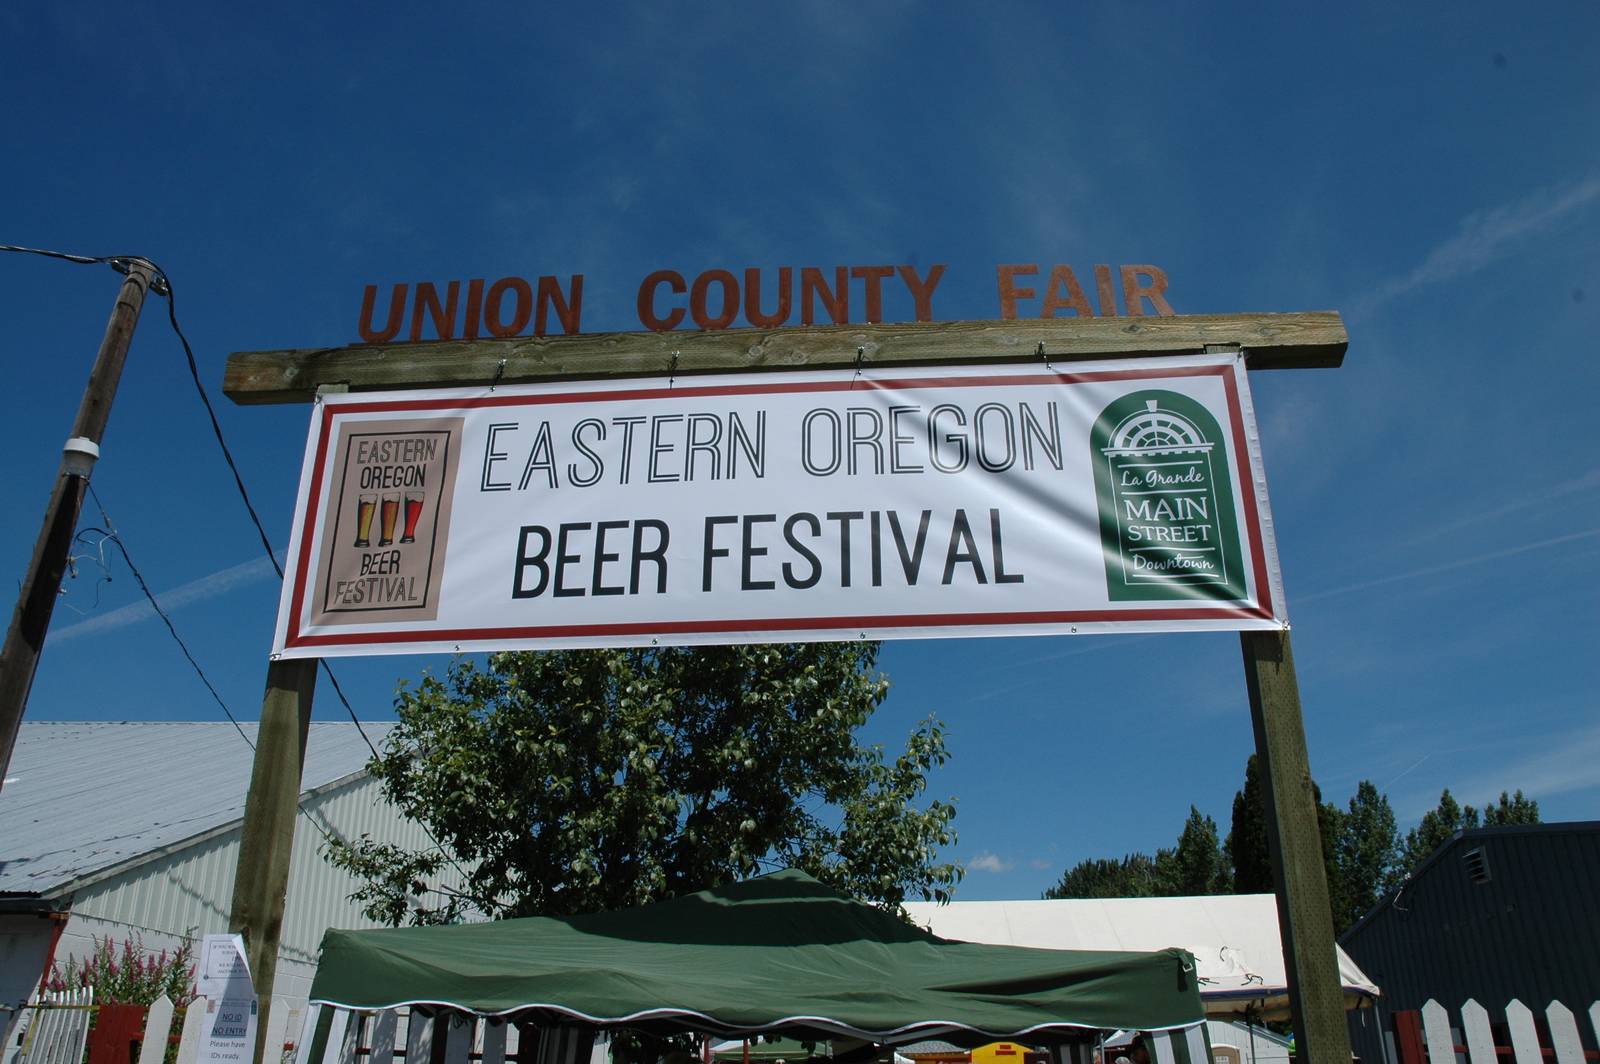 The Eastern Oregon Beer Festival Will Go On, Making It One of the Few